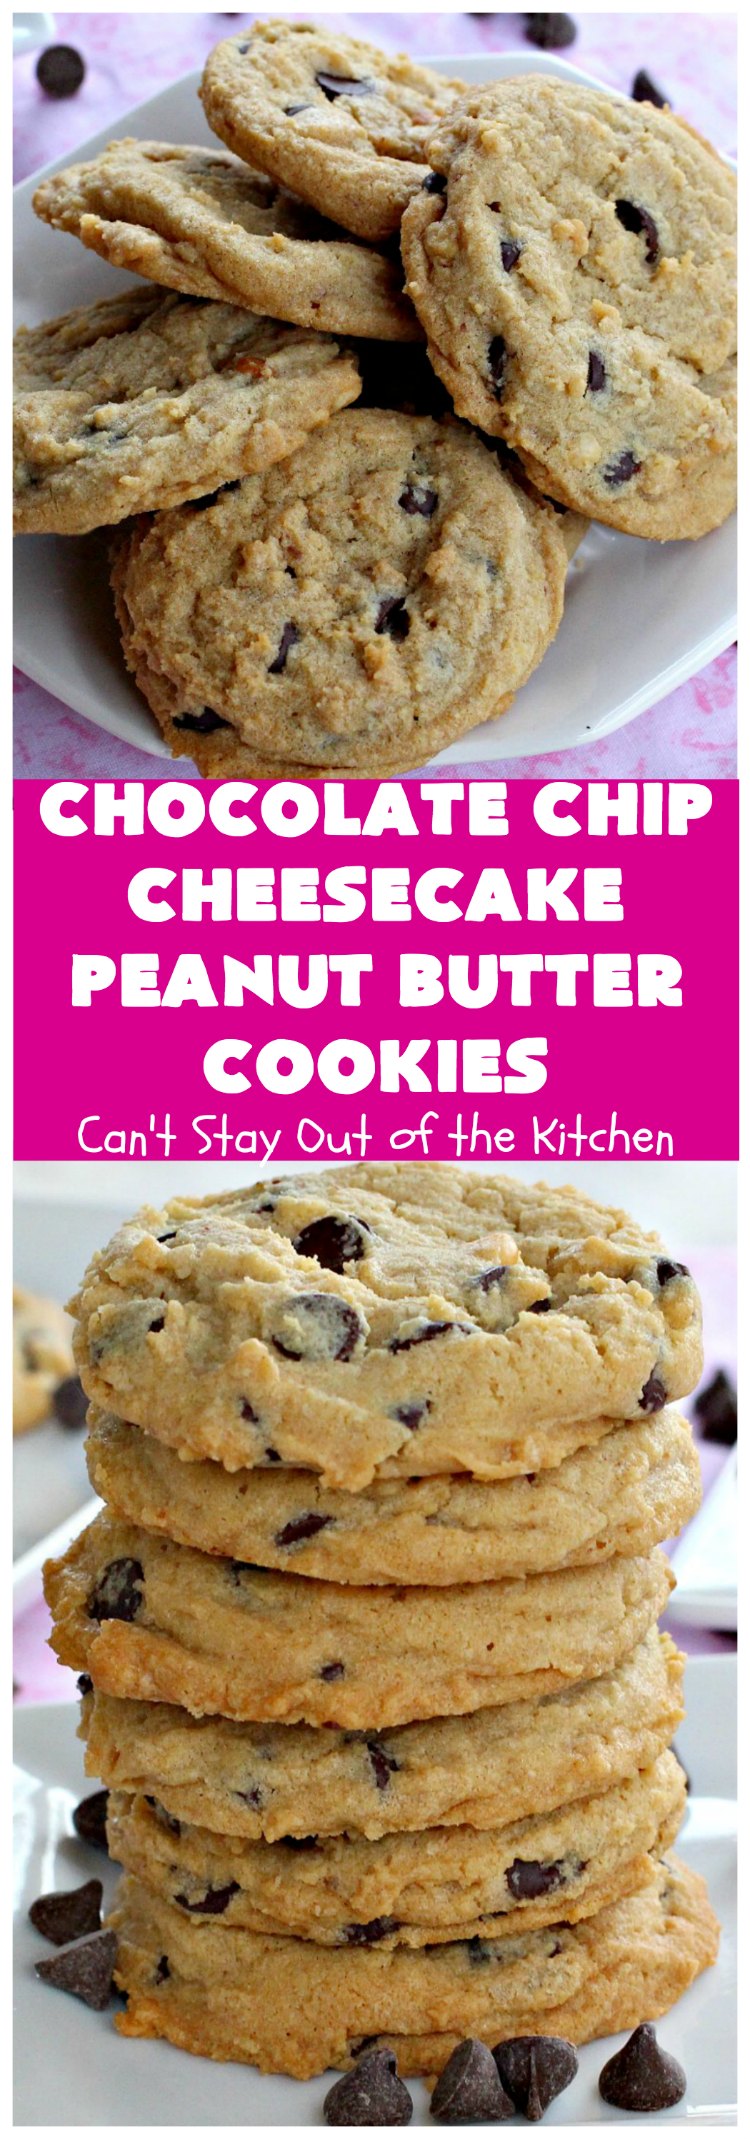 Chocolate Chip Cheesecake Peanut Butter Cookies | Can't Stay Out of the Kitchen